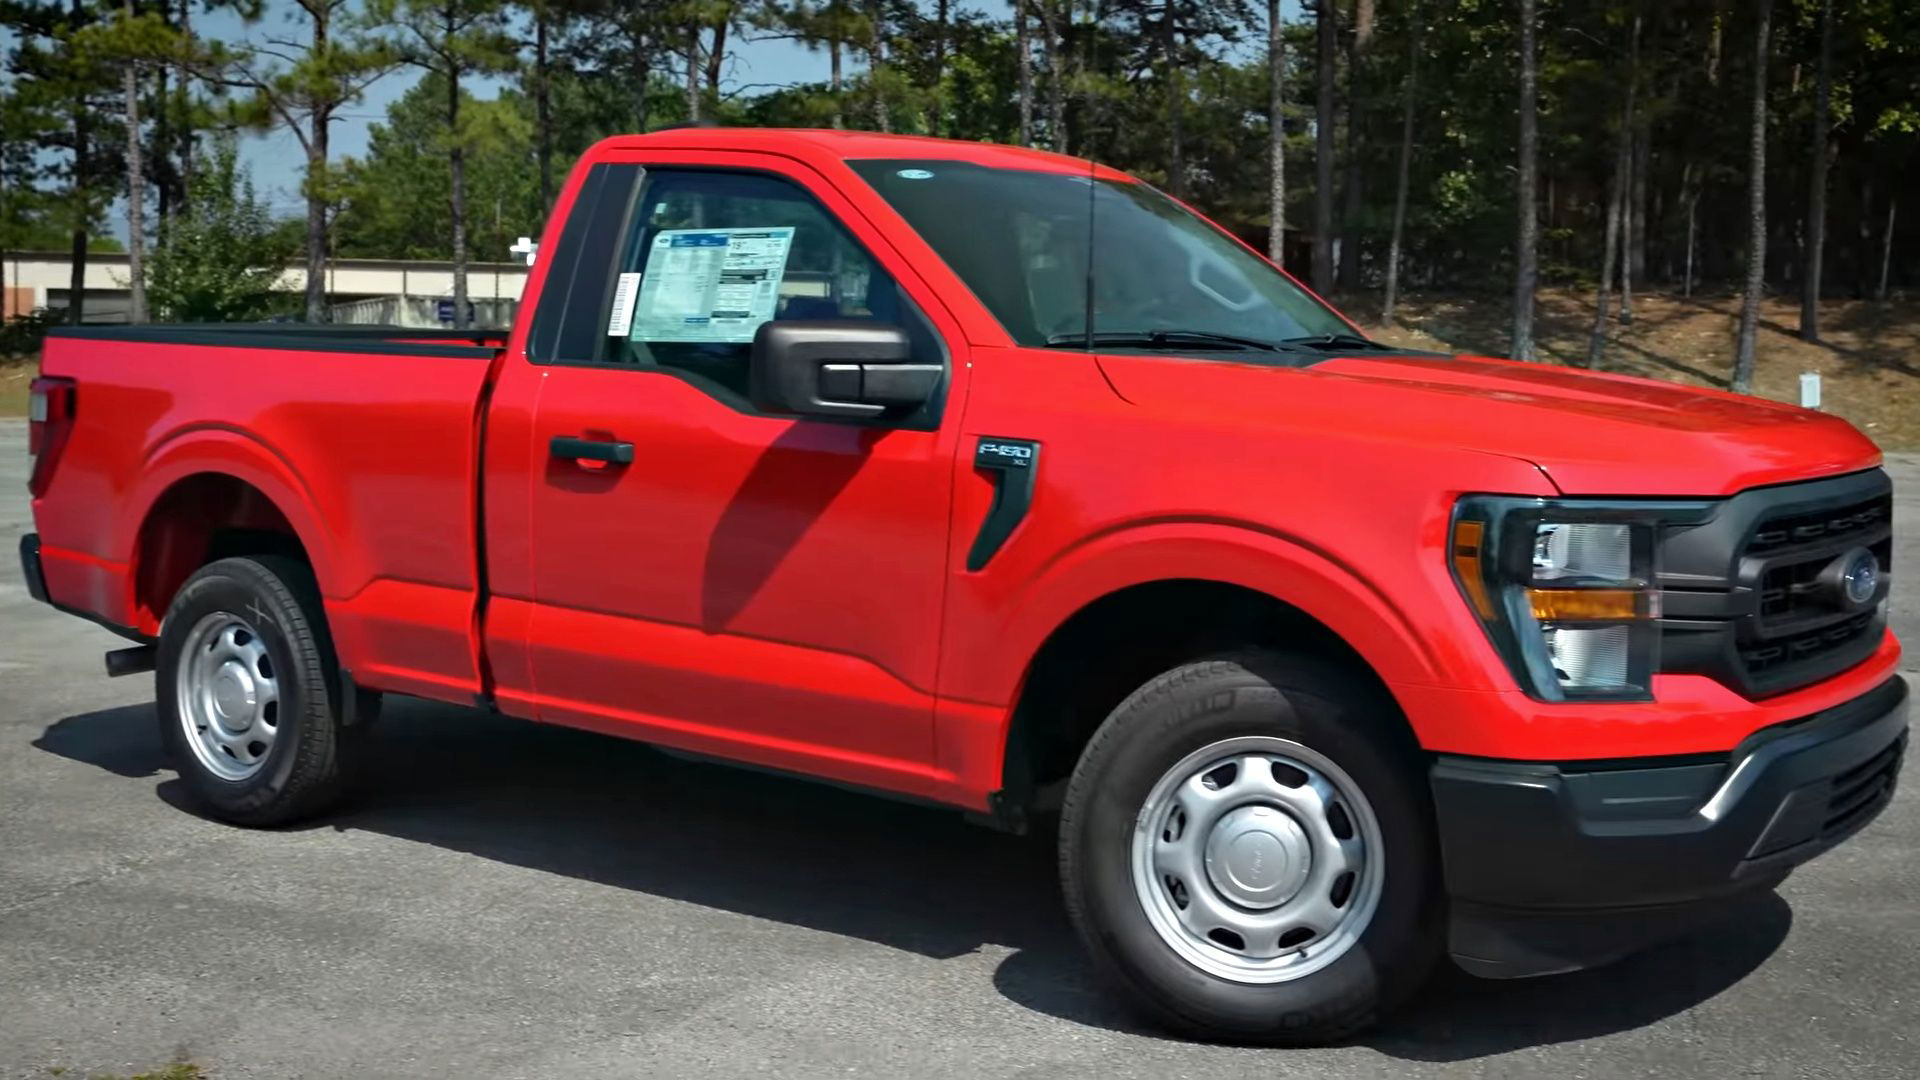 A 705 HP Sleeper F150 For Under 45,000 BrandNew? Here's How